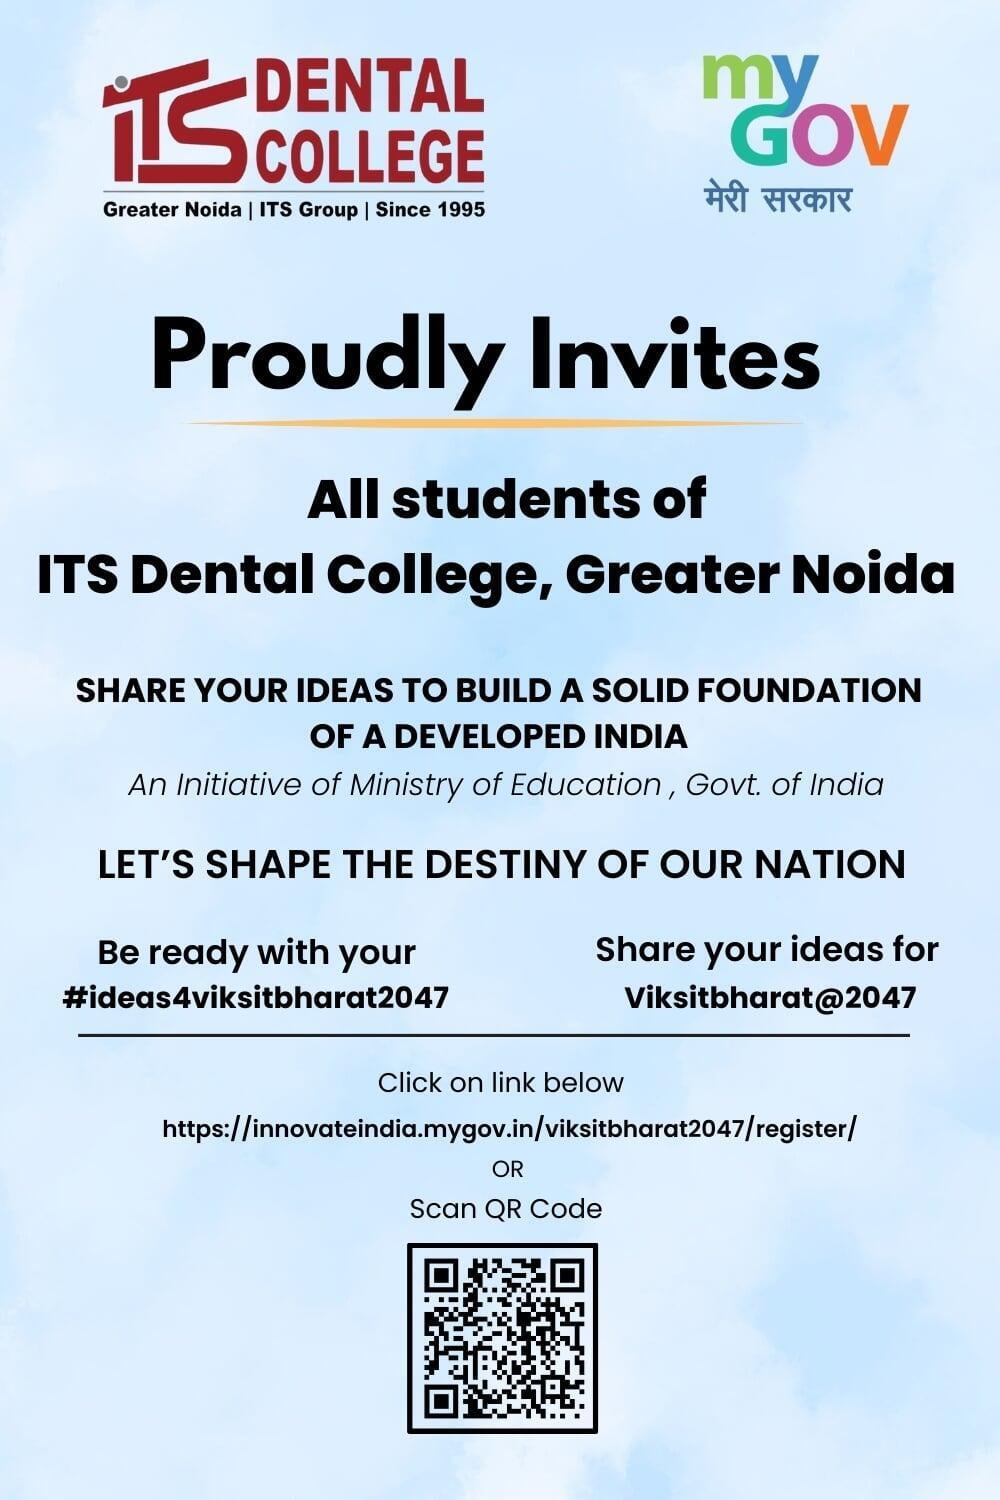 ITS Dental College - Our Milestone